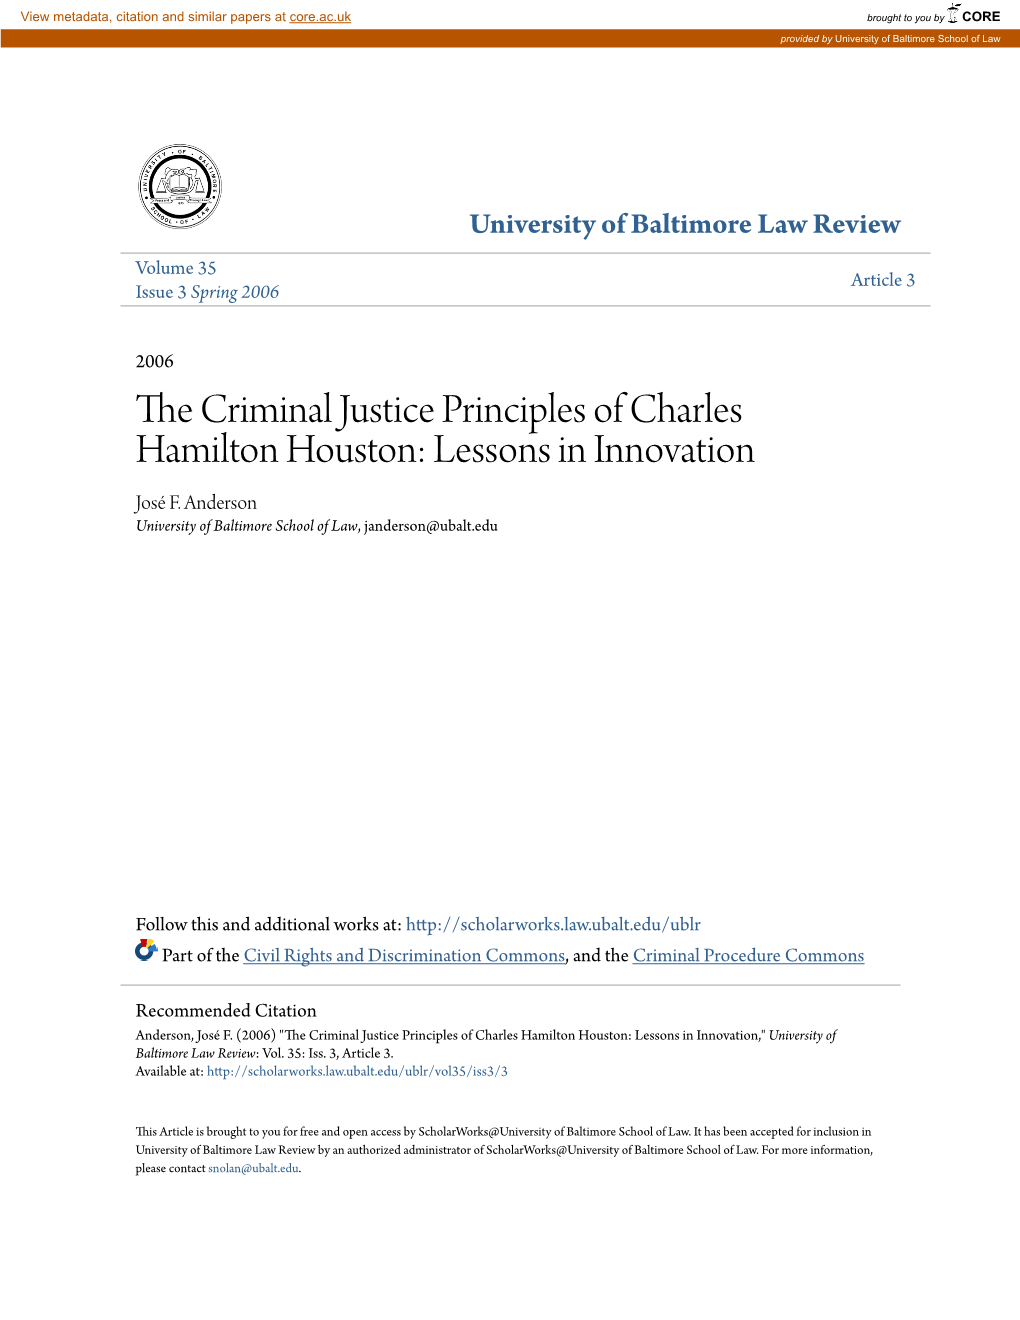 The Criminal Justice Principles of Charles Hamilton Houston: Lessons in Innovation